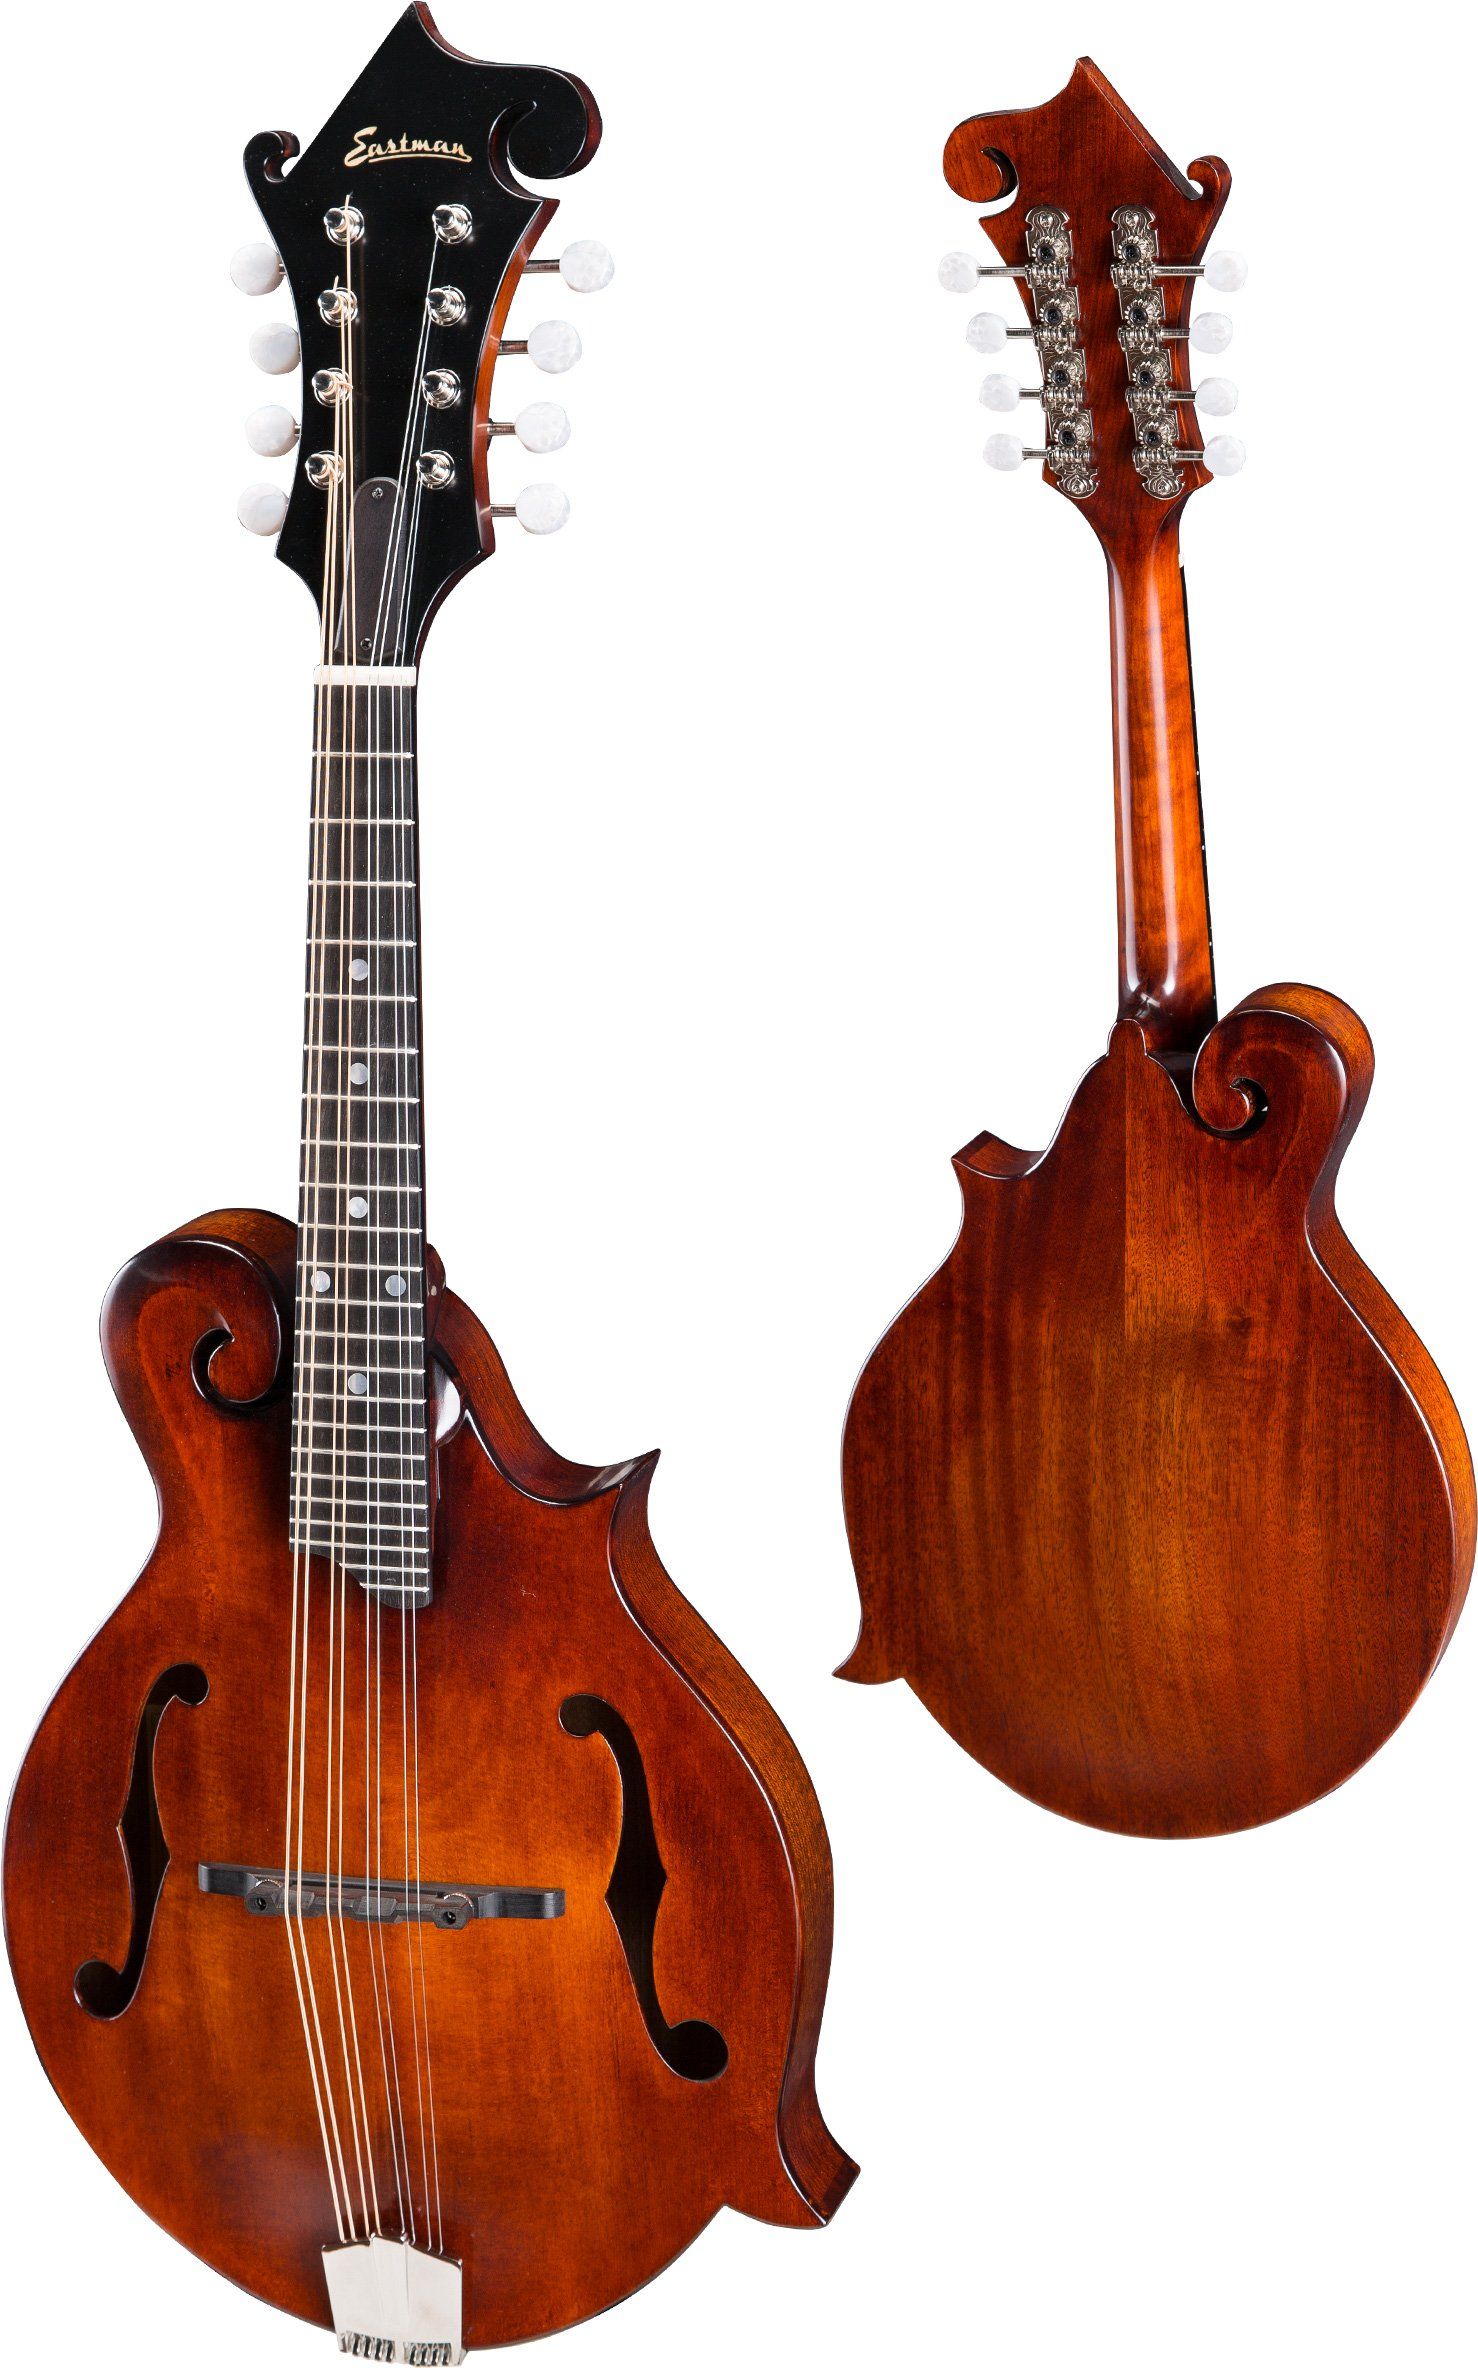 Eastman MD515CC/n Classic Contour Comfort Mandolin (Classic Vintage Nitro finish, other specs same as MD515, w/Case), Mandolin for sale at Richards Guitars.